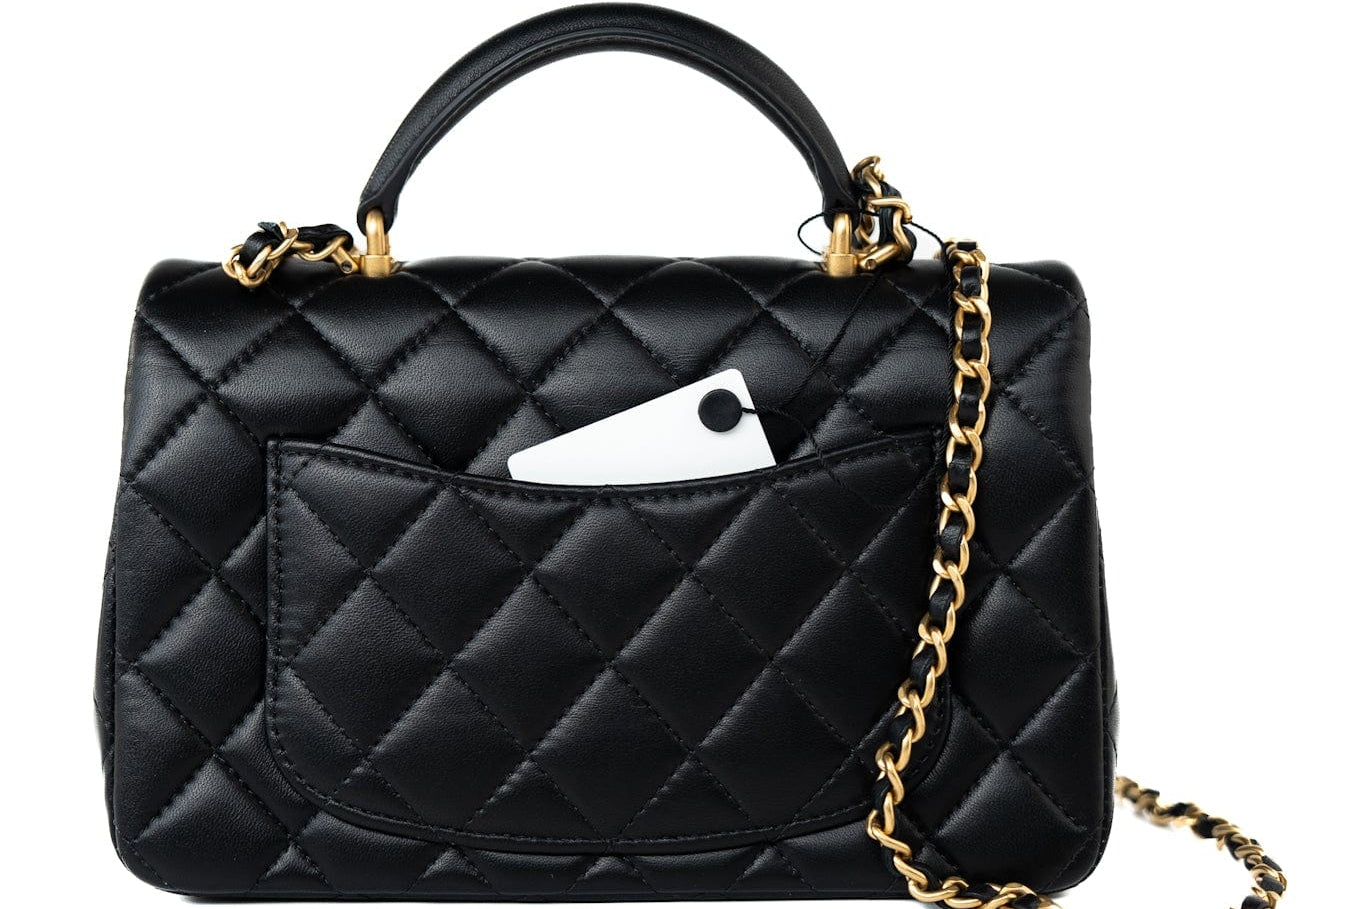 CHANEL Handbag 21A Black Lambskin Quilted Mini Top Handle Antique Gold Hardware - Redeluxe